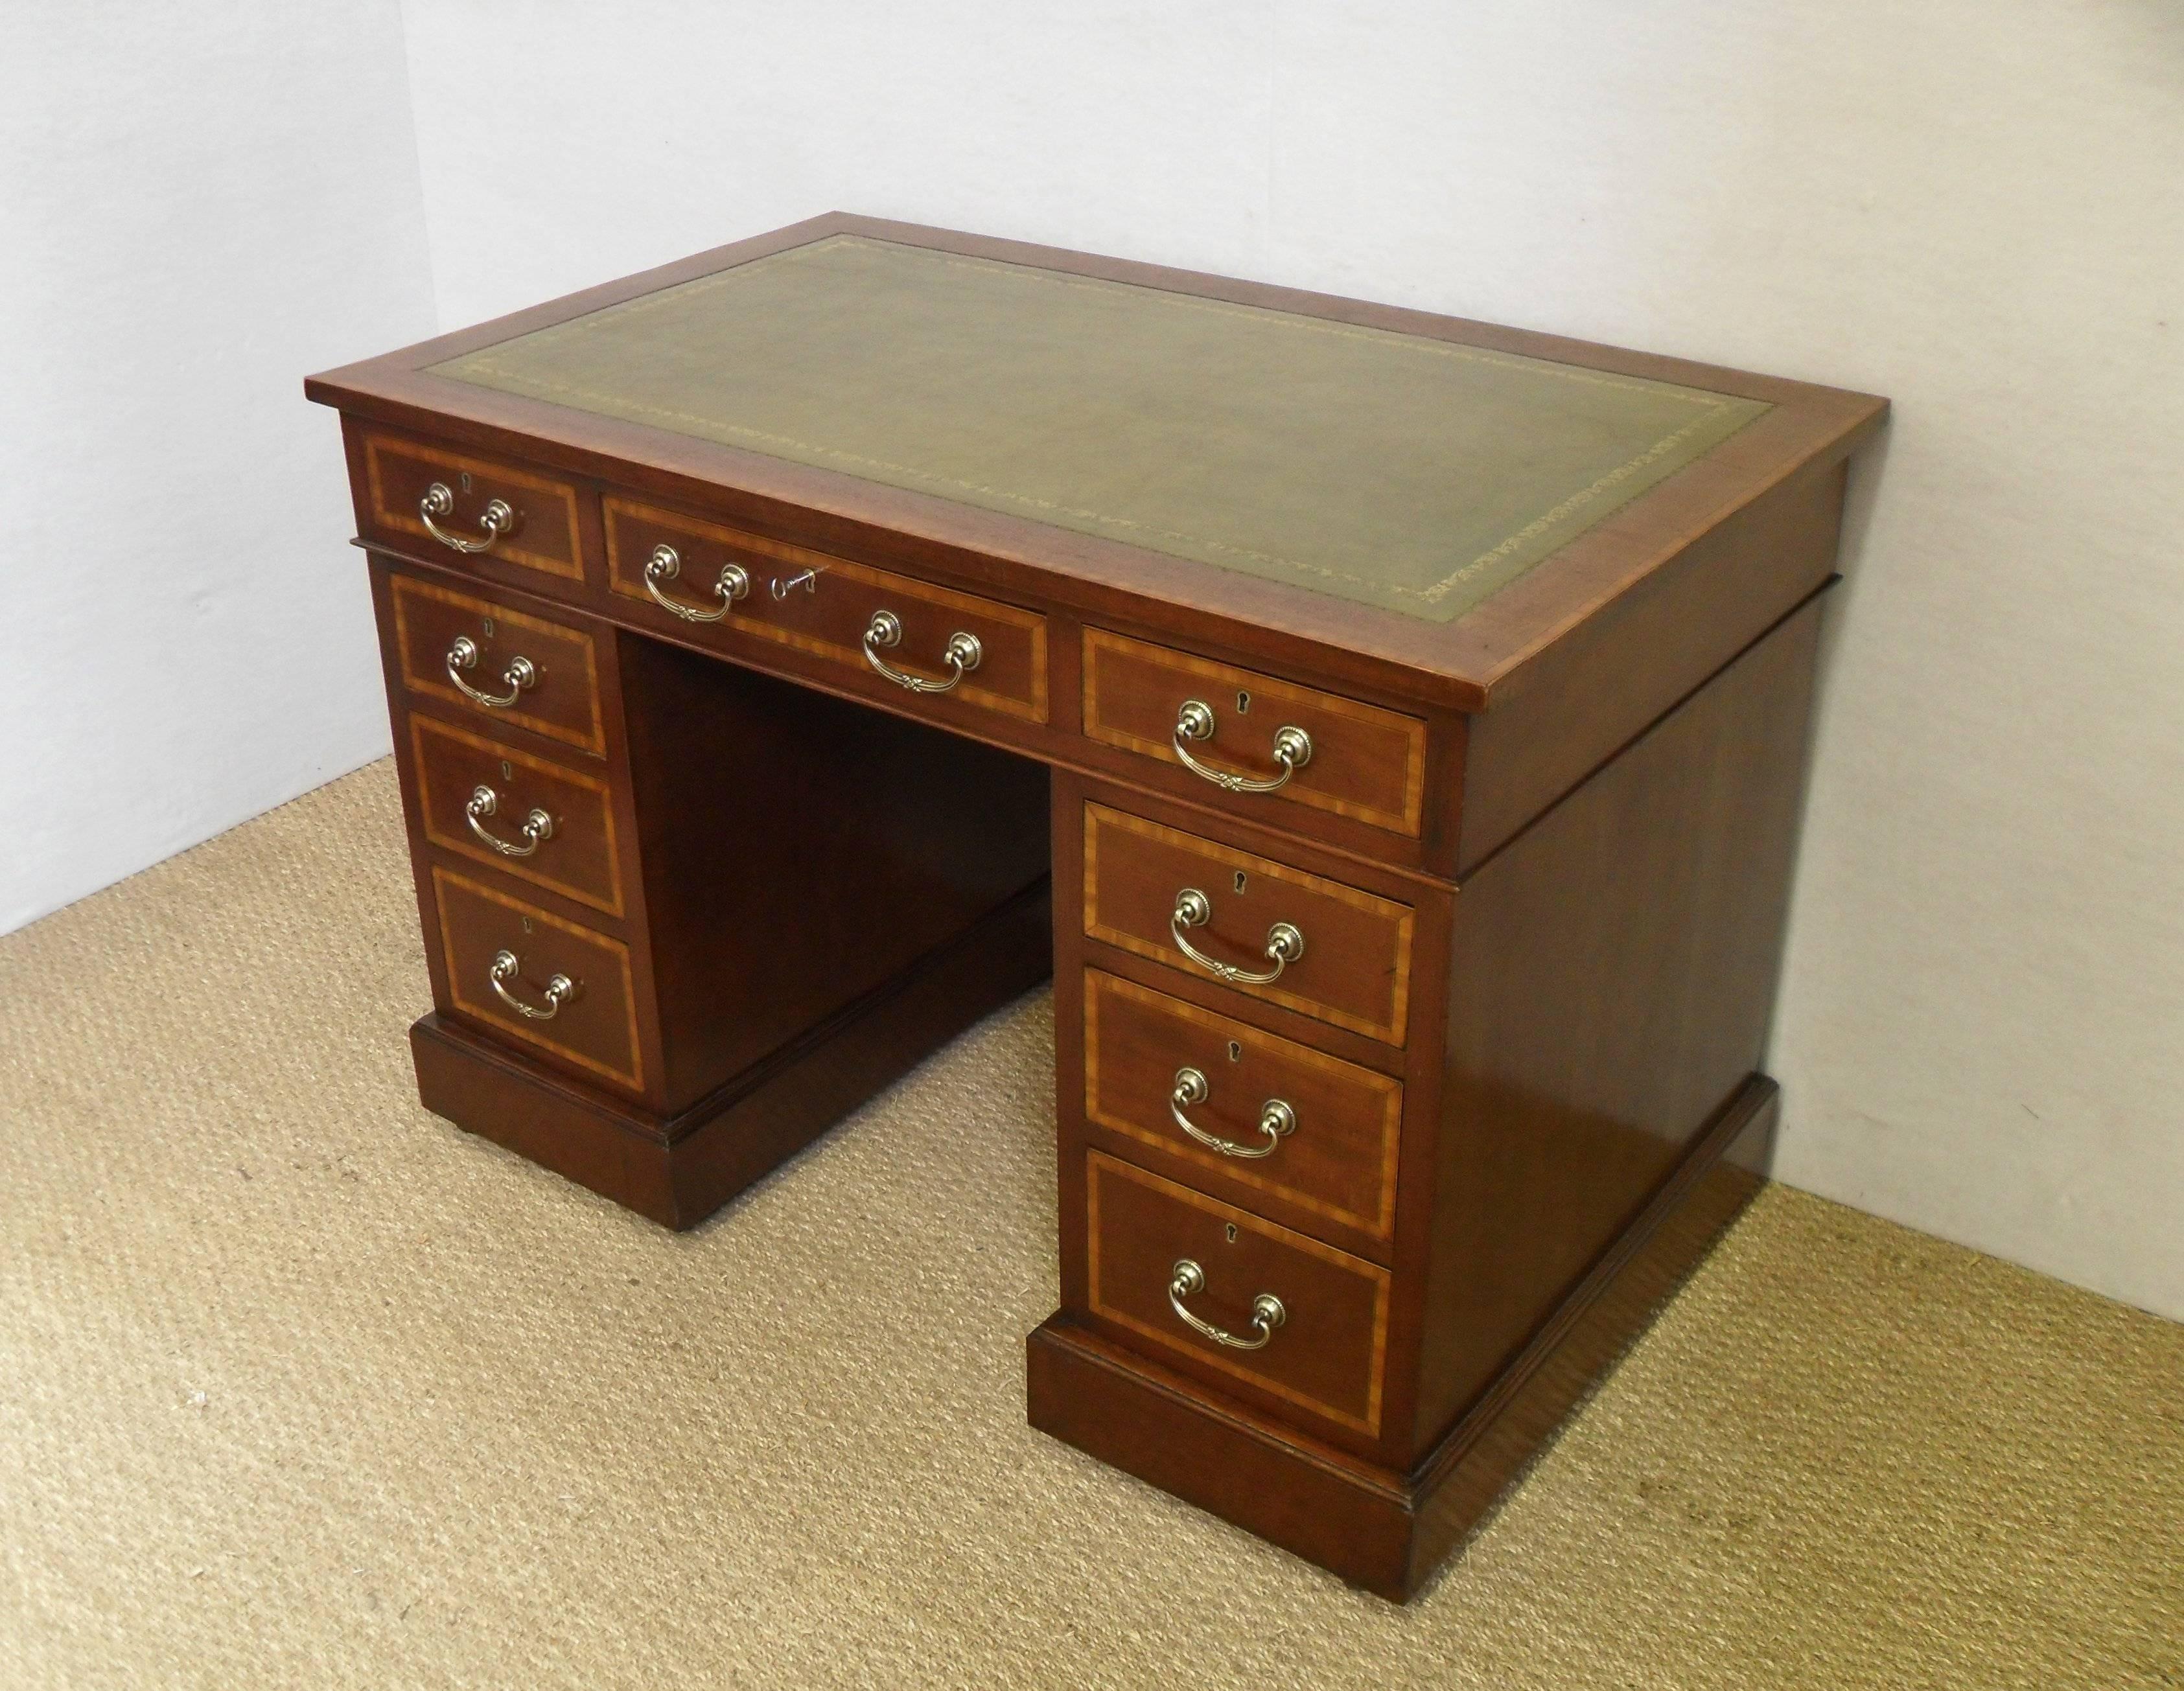 A very good quality Edwardian mahogany pedestal writing desk with satinwood and boxwood string inlay. All the drawers are made of mahogany. The top is fitted with a green hide and gold tooled leather.

Knee hole measurements:-
Height 23.5